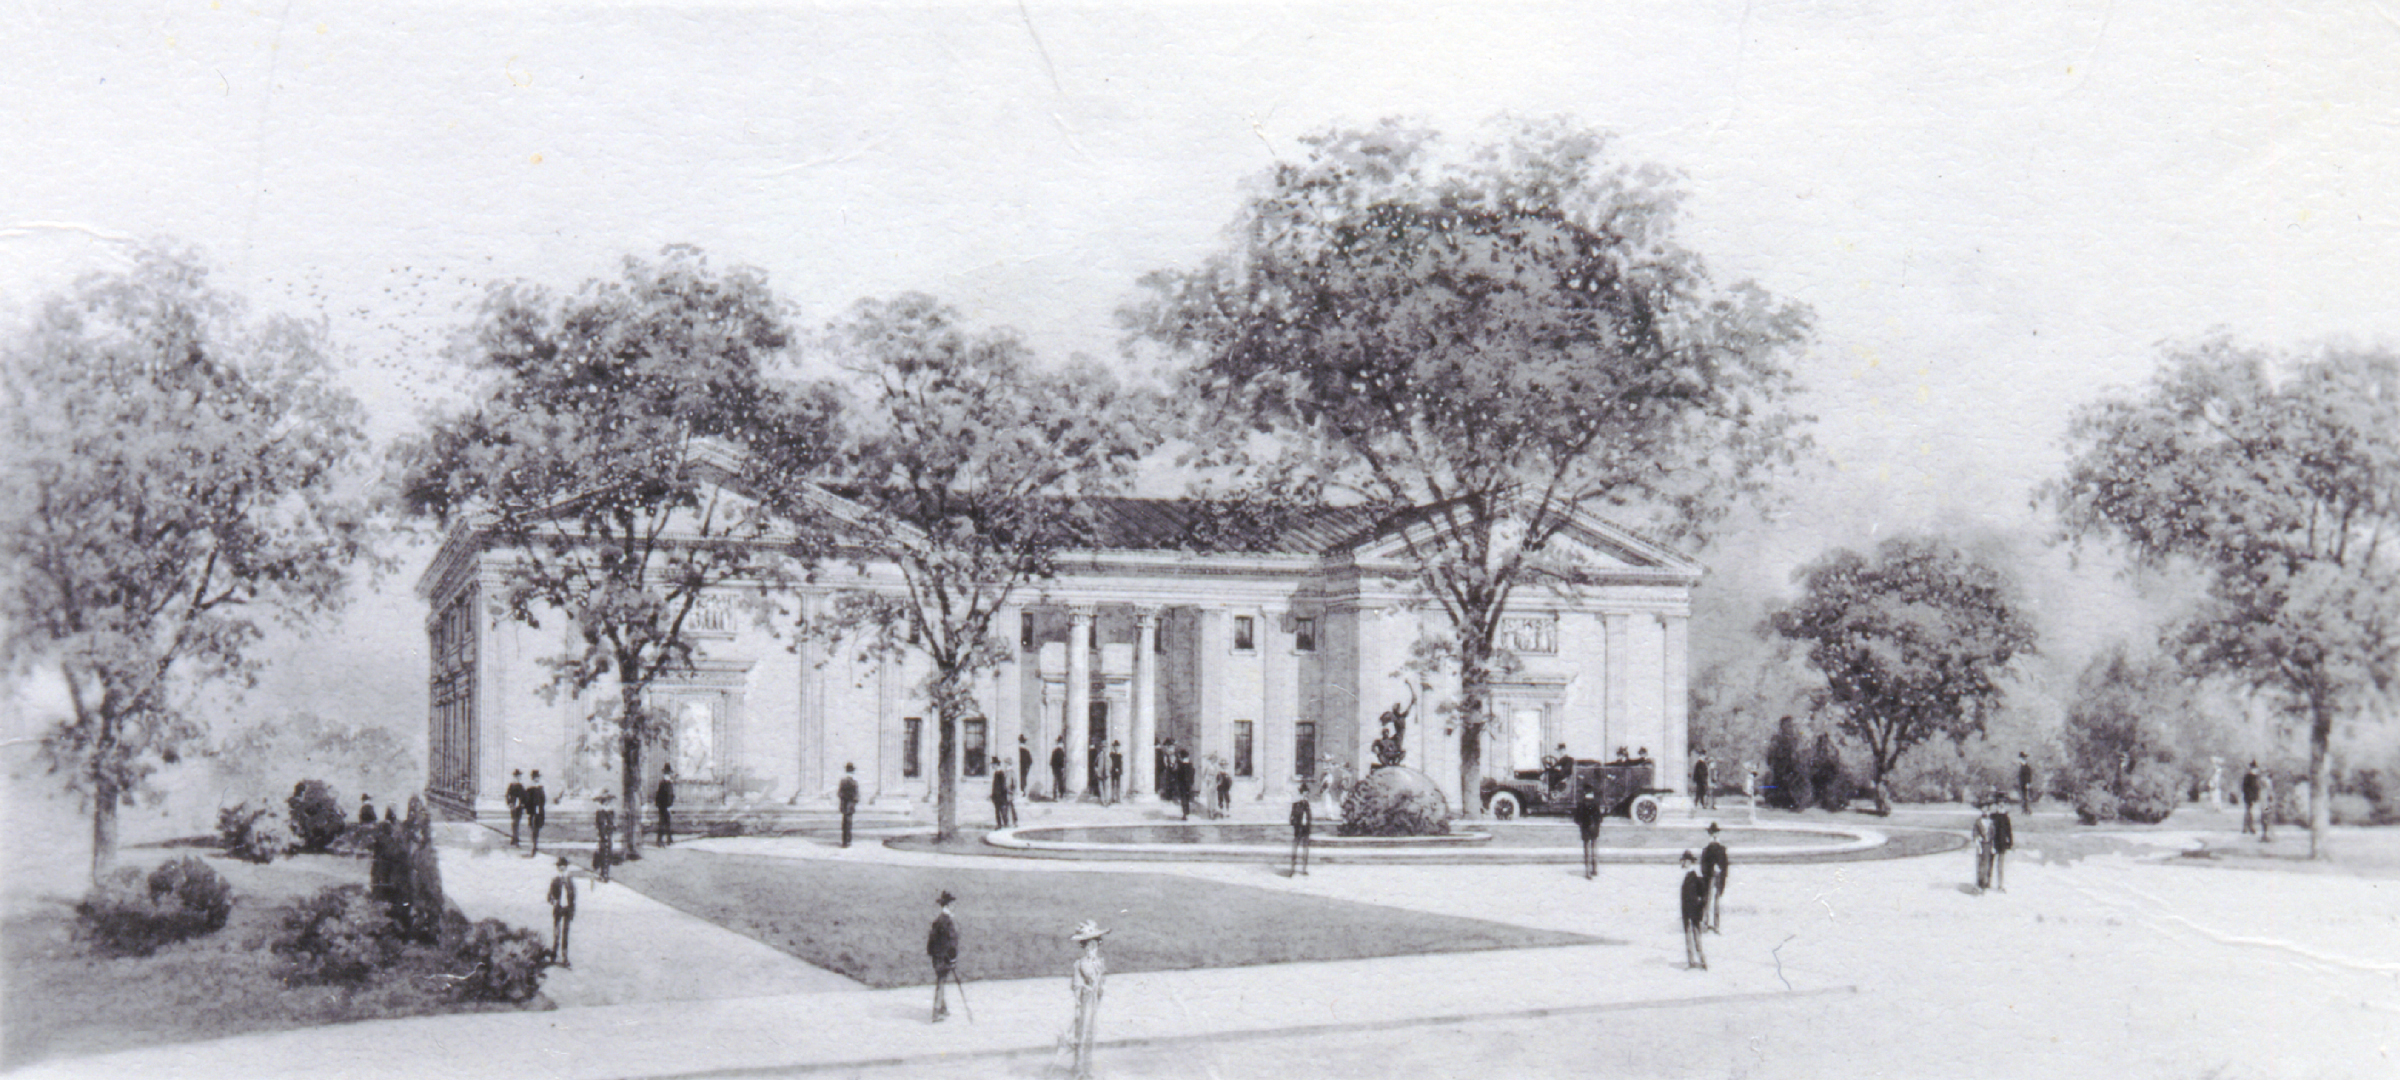 Architect's rendering of MAM from 1914